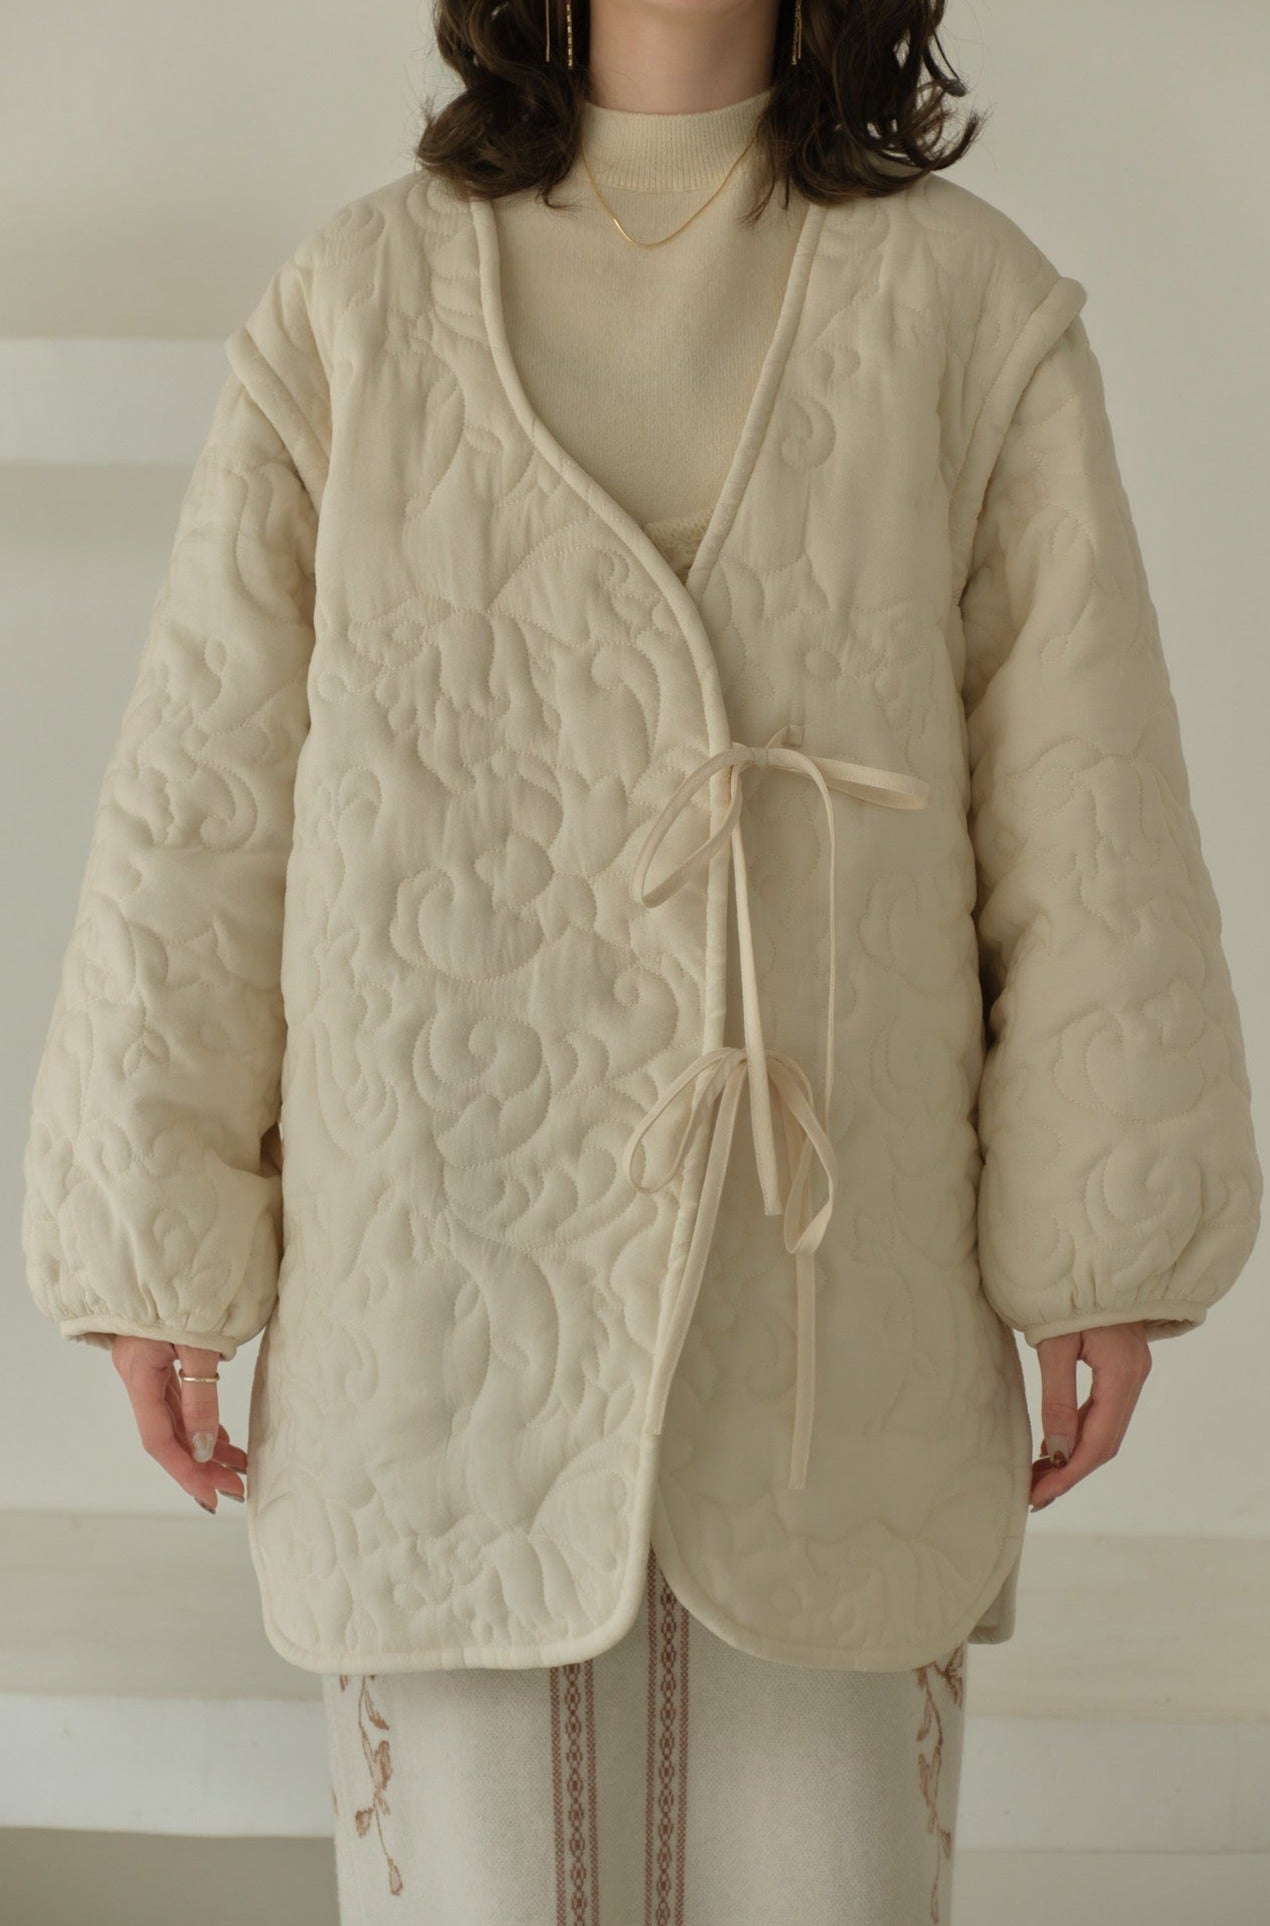 Eaphi leaf pattern 2way quilting coat1度のみ着用